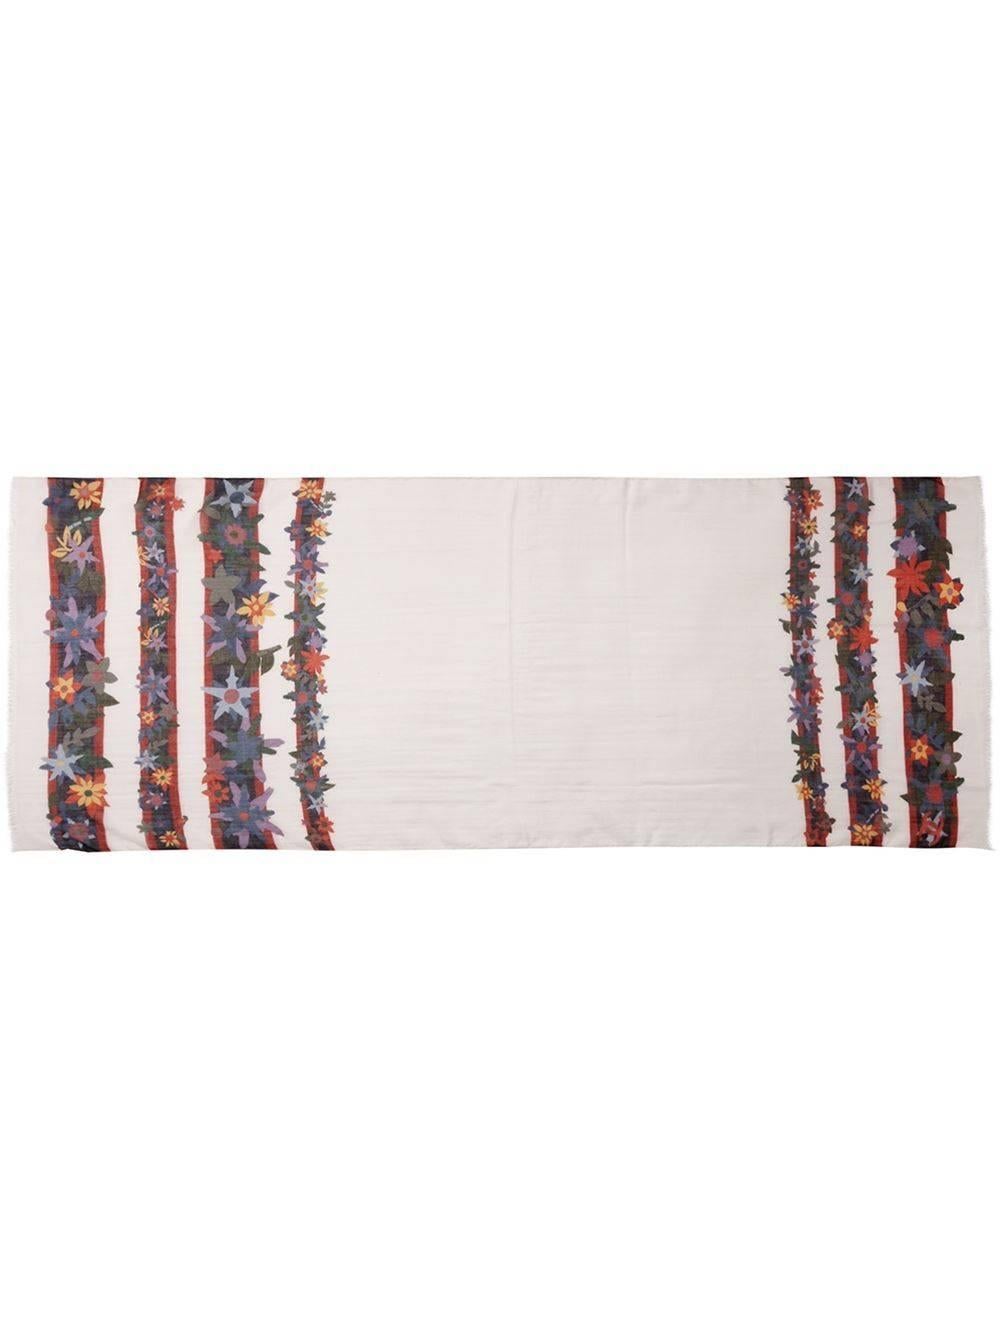 White and multicoloured silk-cashmere blend floral striped printed scarf featuring frayed edges.

Colour: Multicolour

Material: Silk 20% / Cashmere 80%

Measurements: W: 65cm, L: 130cm

Condition: 10 out of 10
Excellent